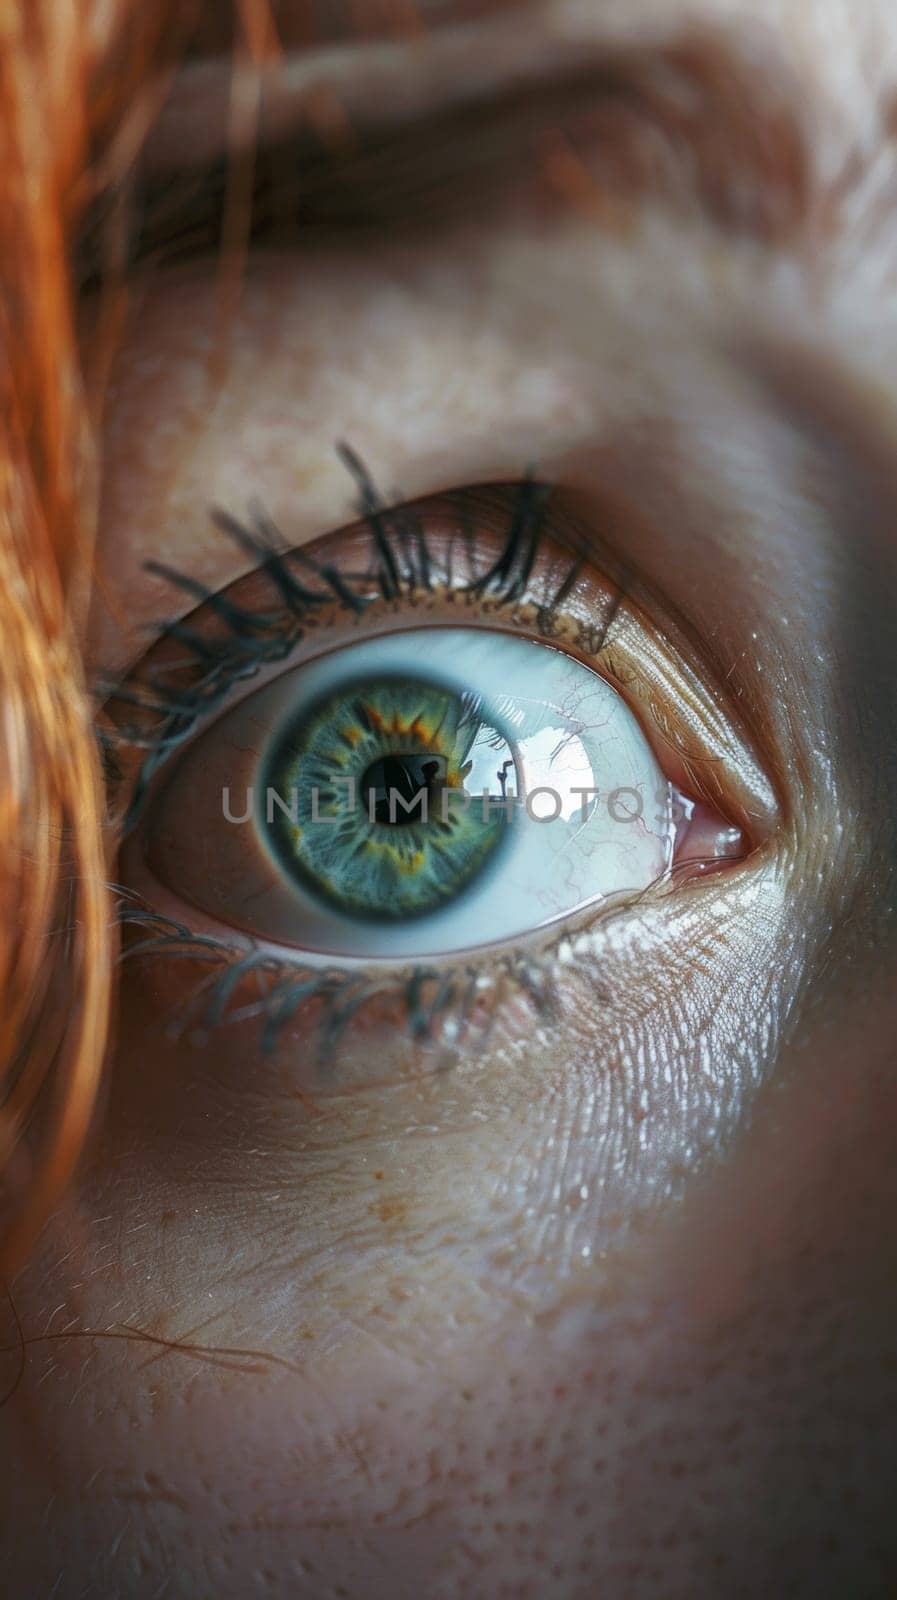 A close up of a woman's eye with red hair and blue eyes, AI by starush